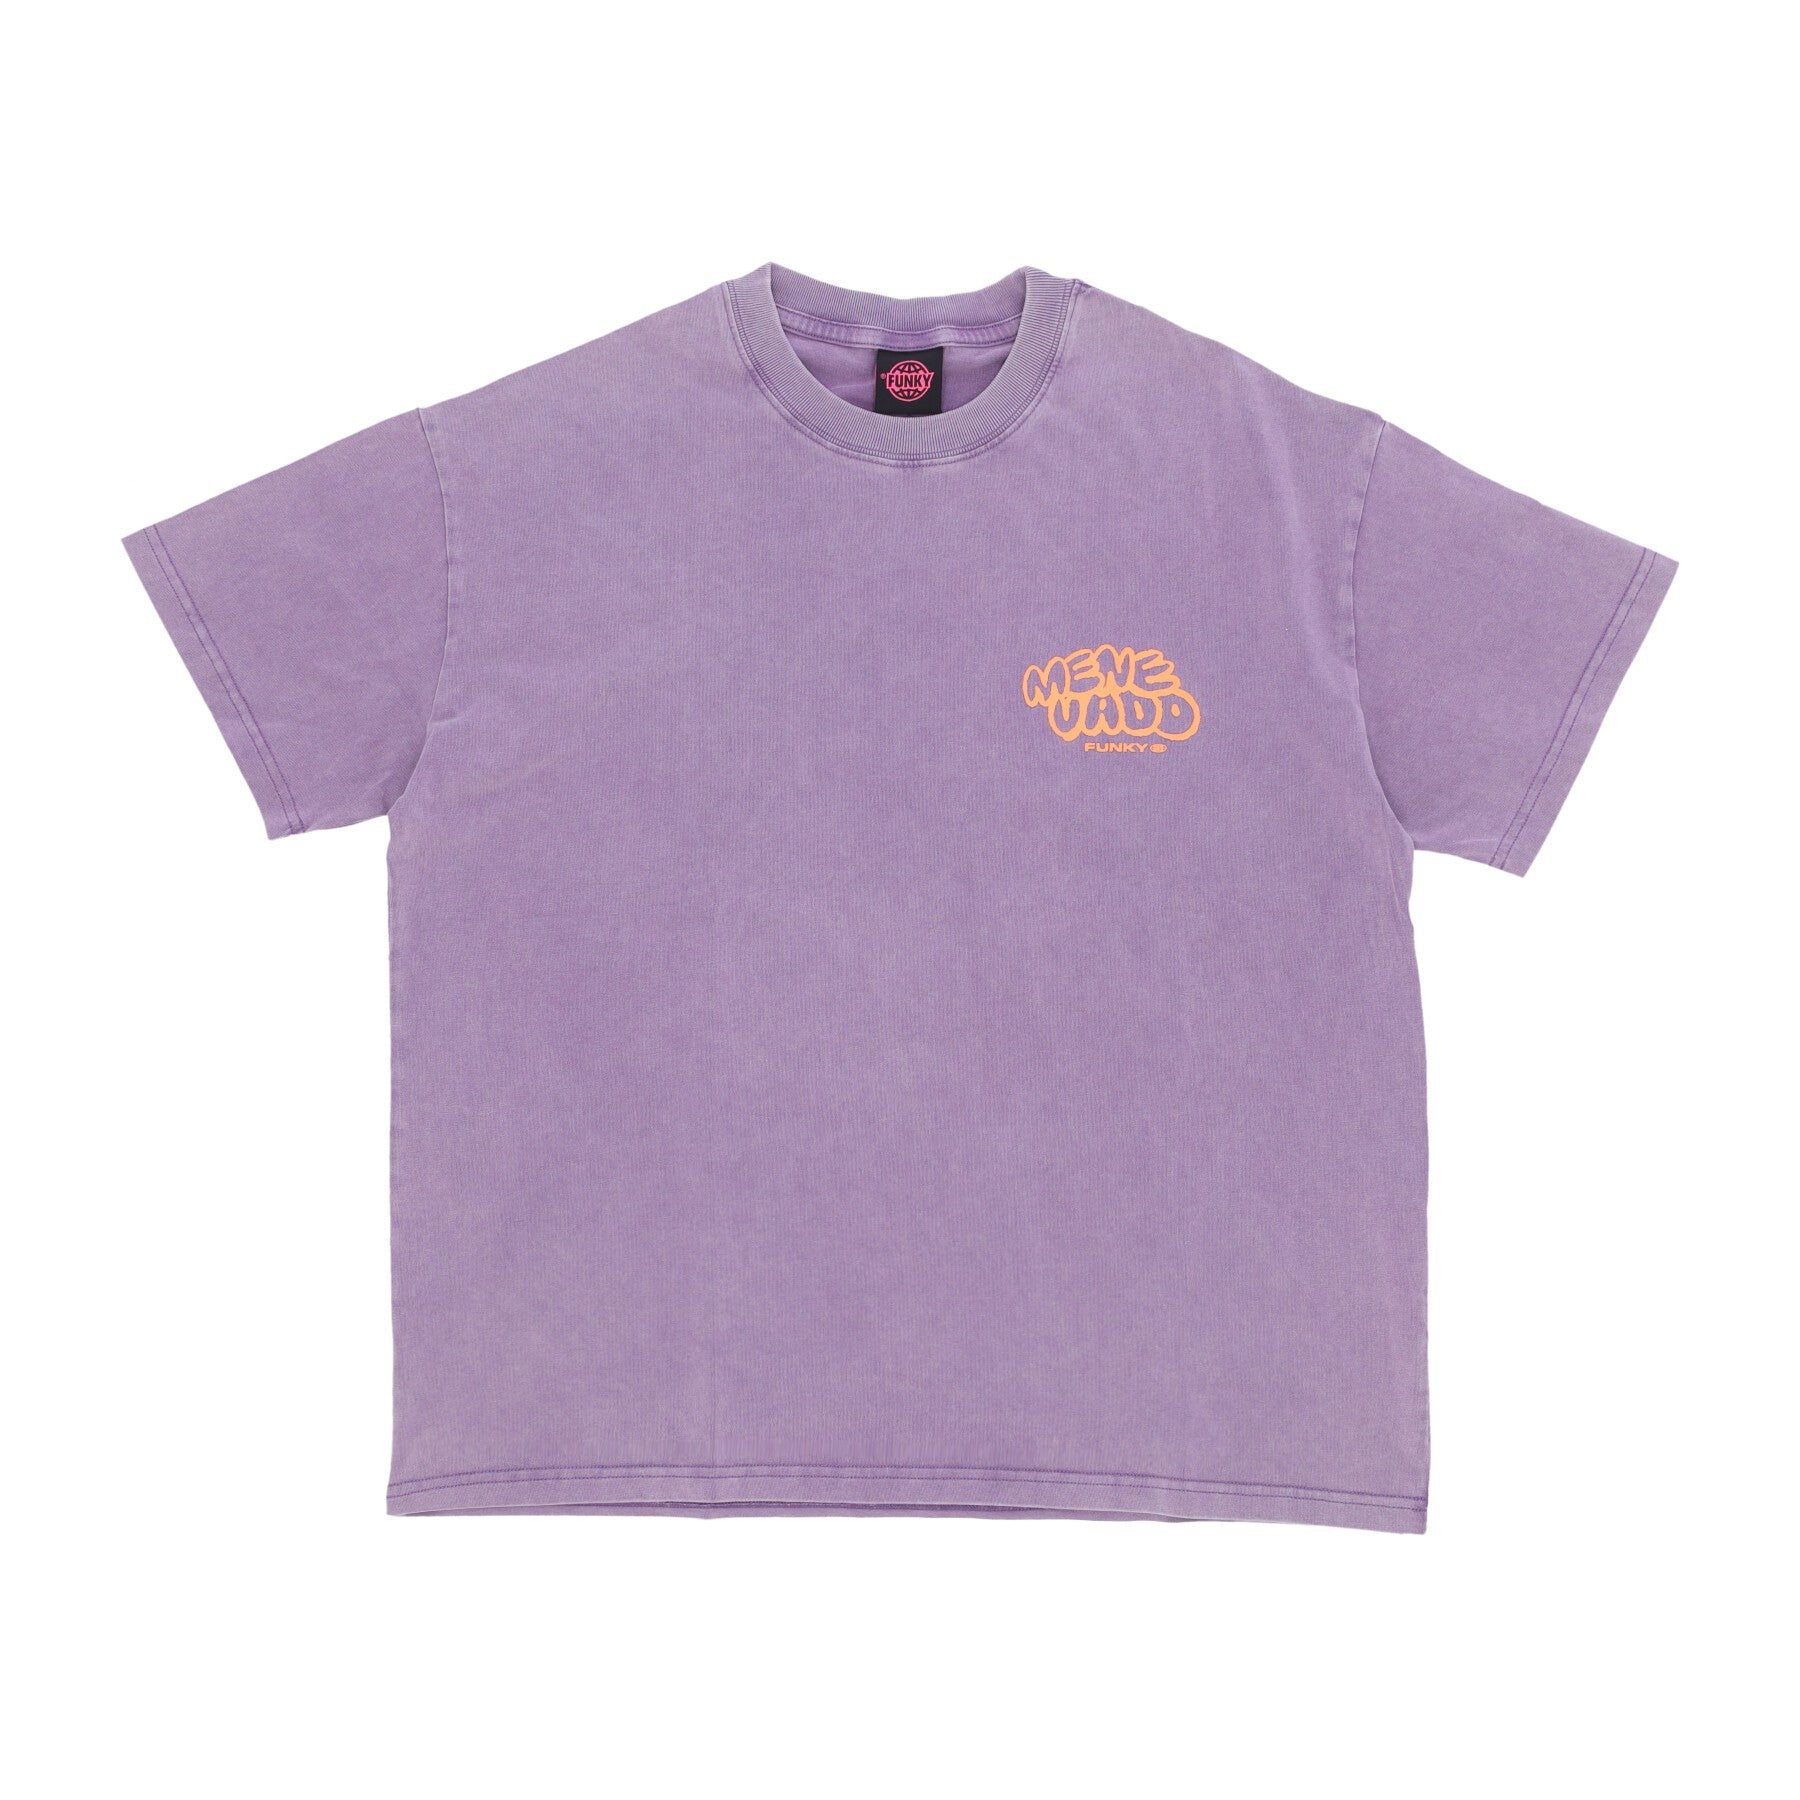 Menevado Tee Lilac Washed Out Men's T-Shirt